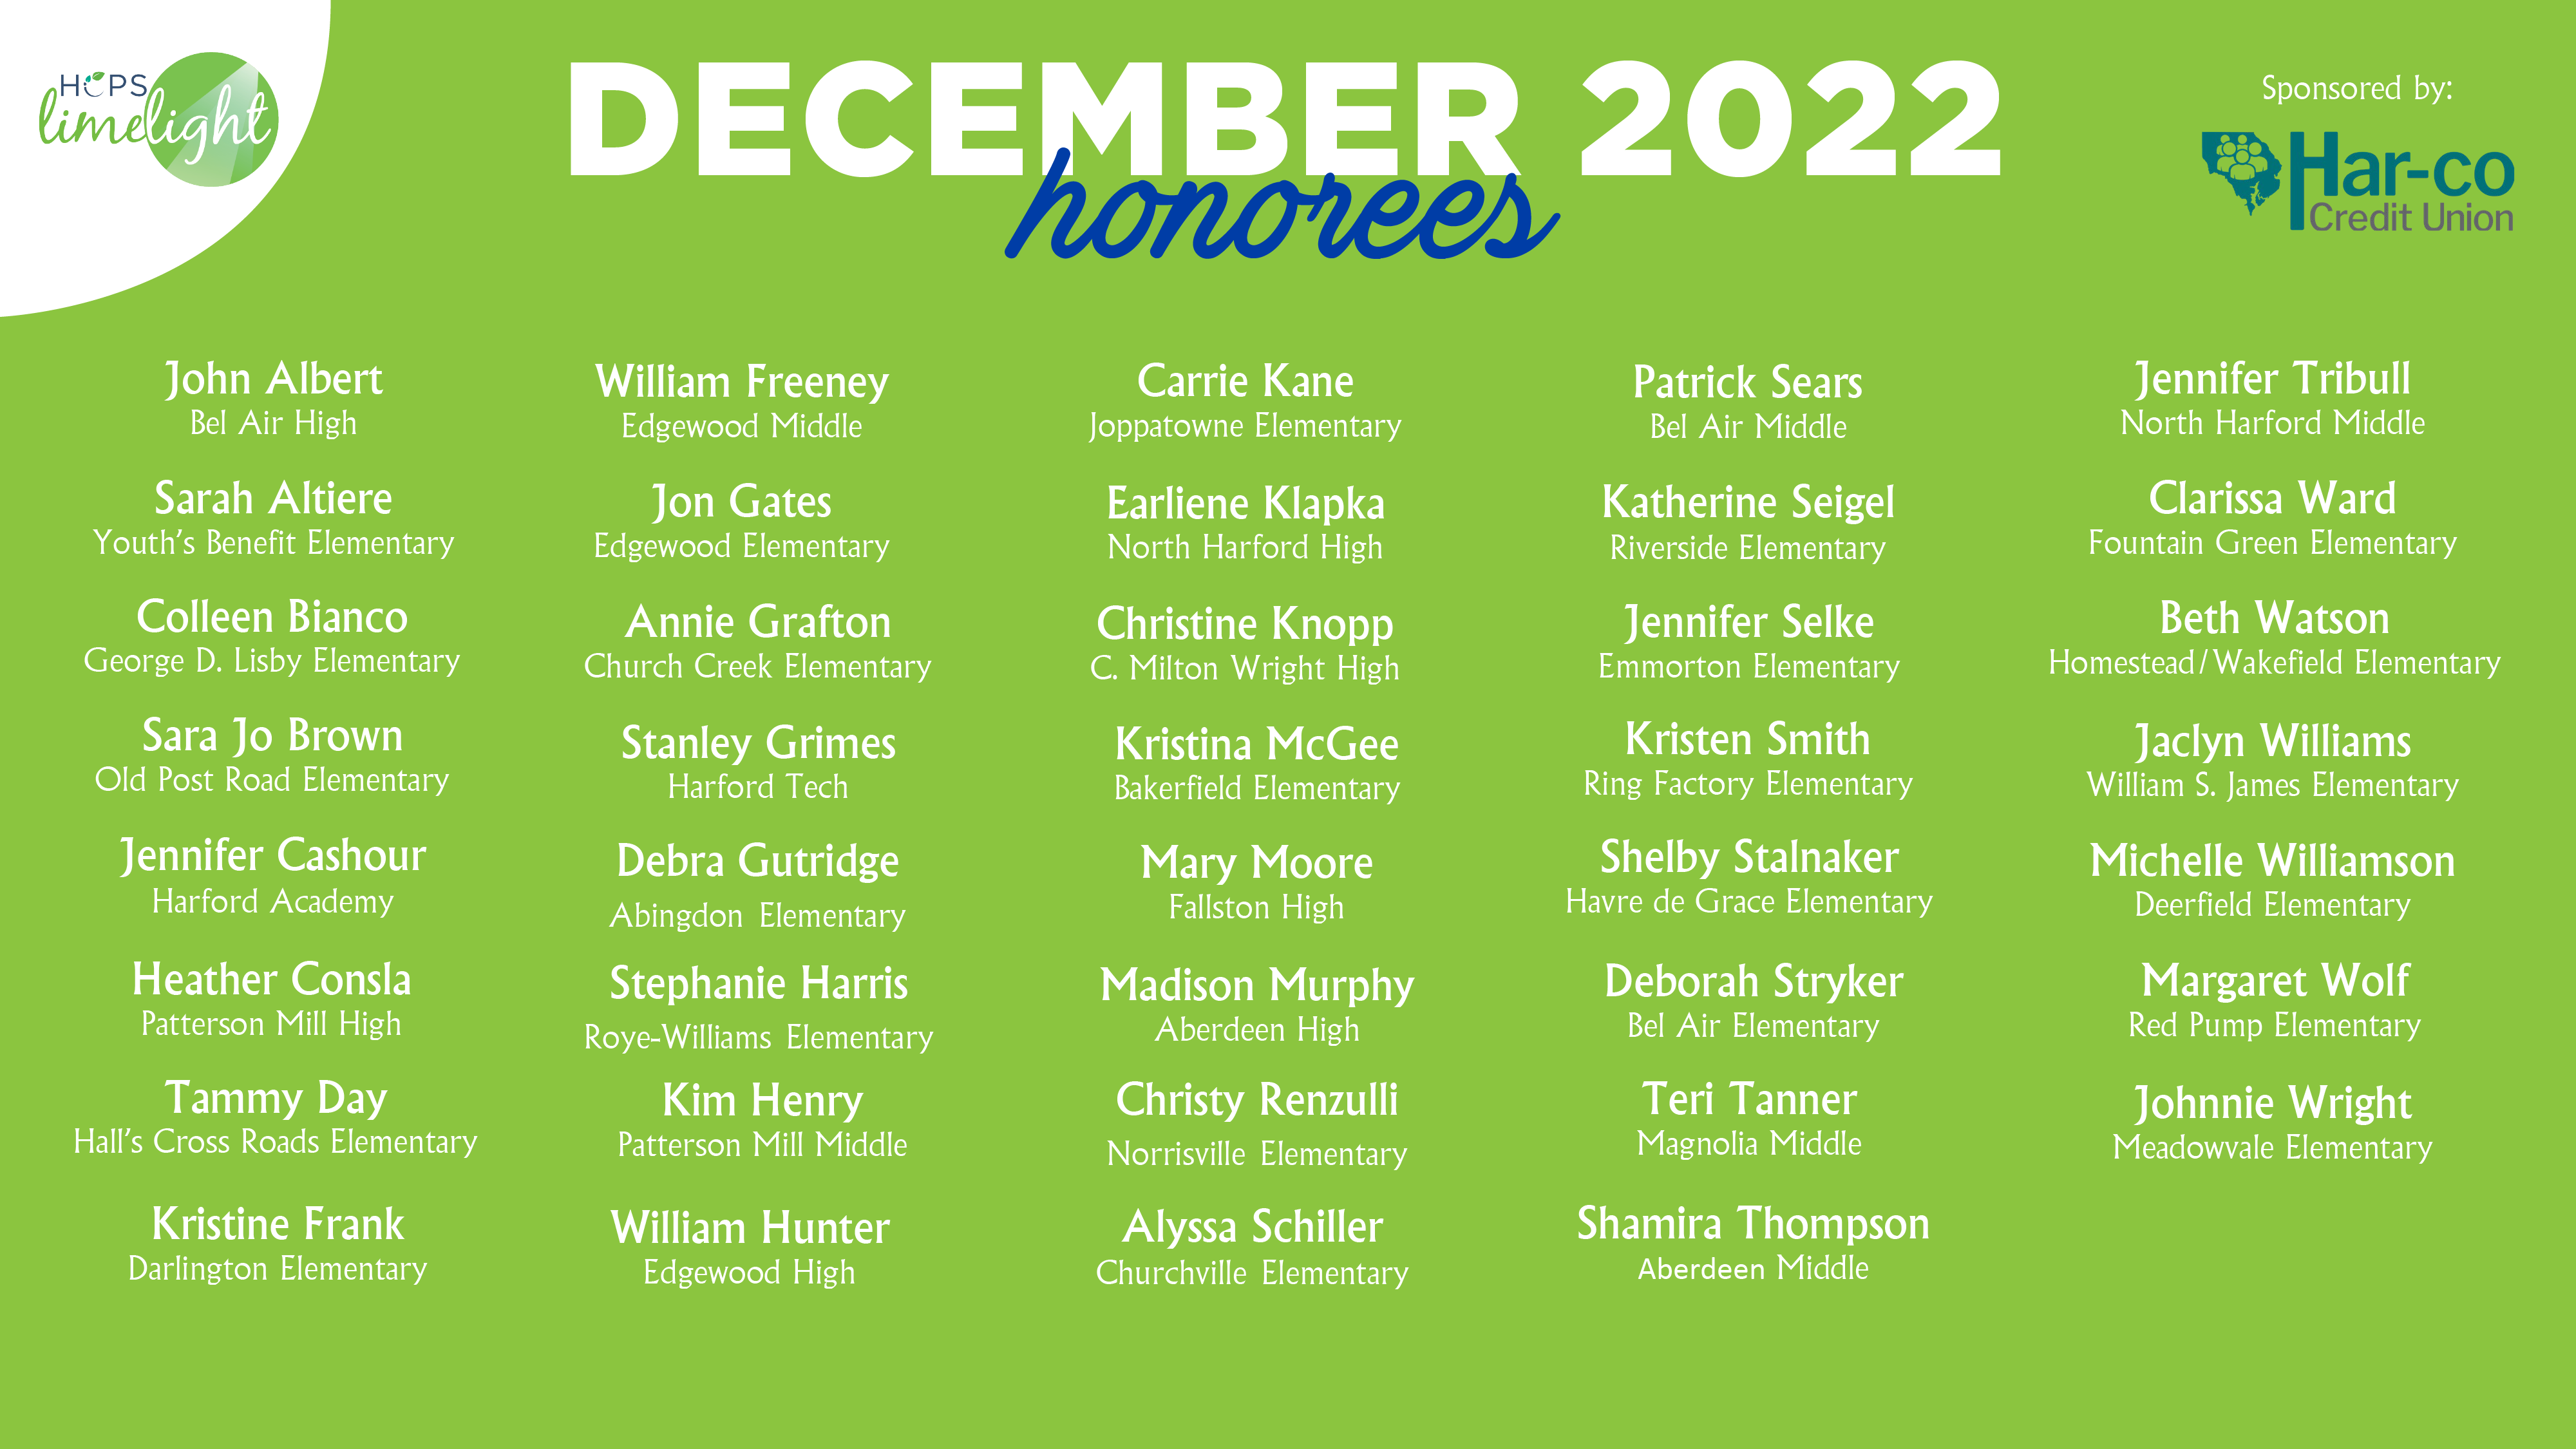 HCPS Limelight Honorees - December 2022